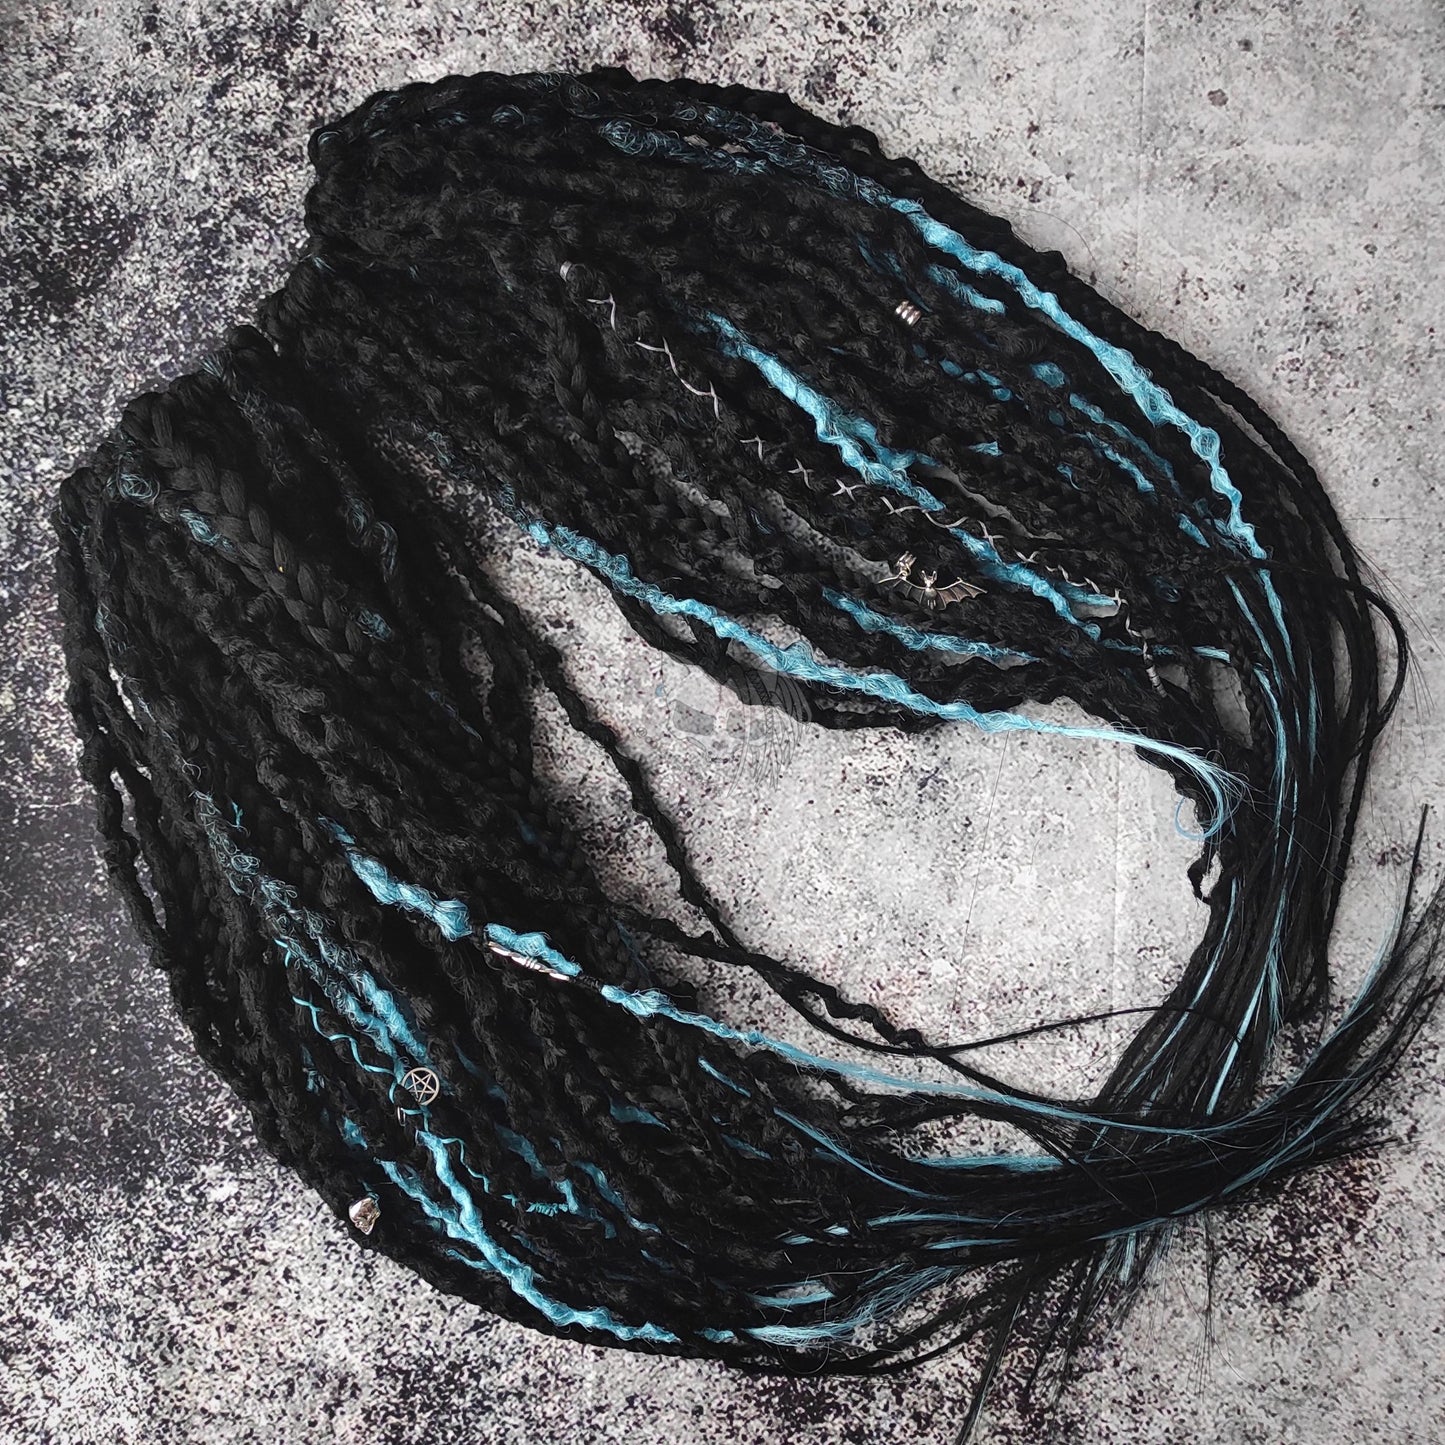 Black with Blue Goth Dreadlocks with Braids. Custom Synthetic Extensions.